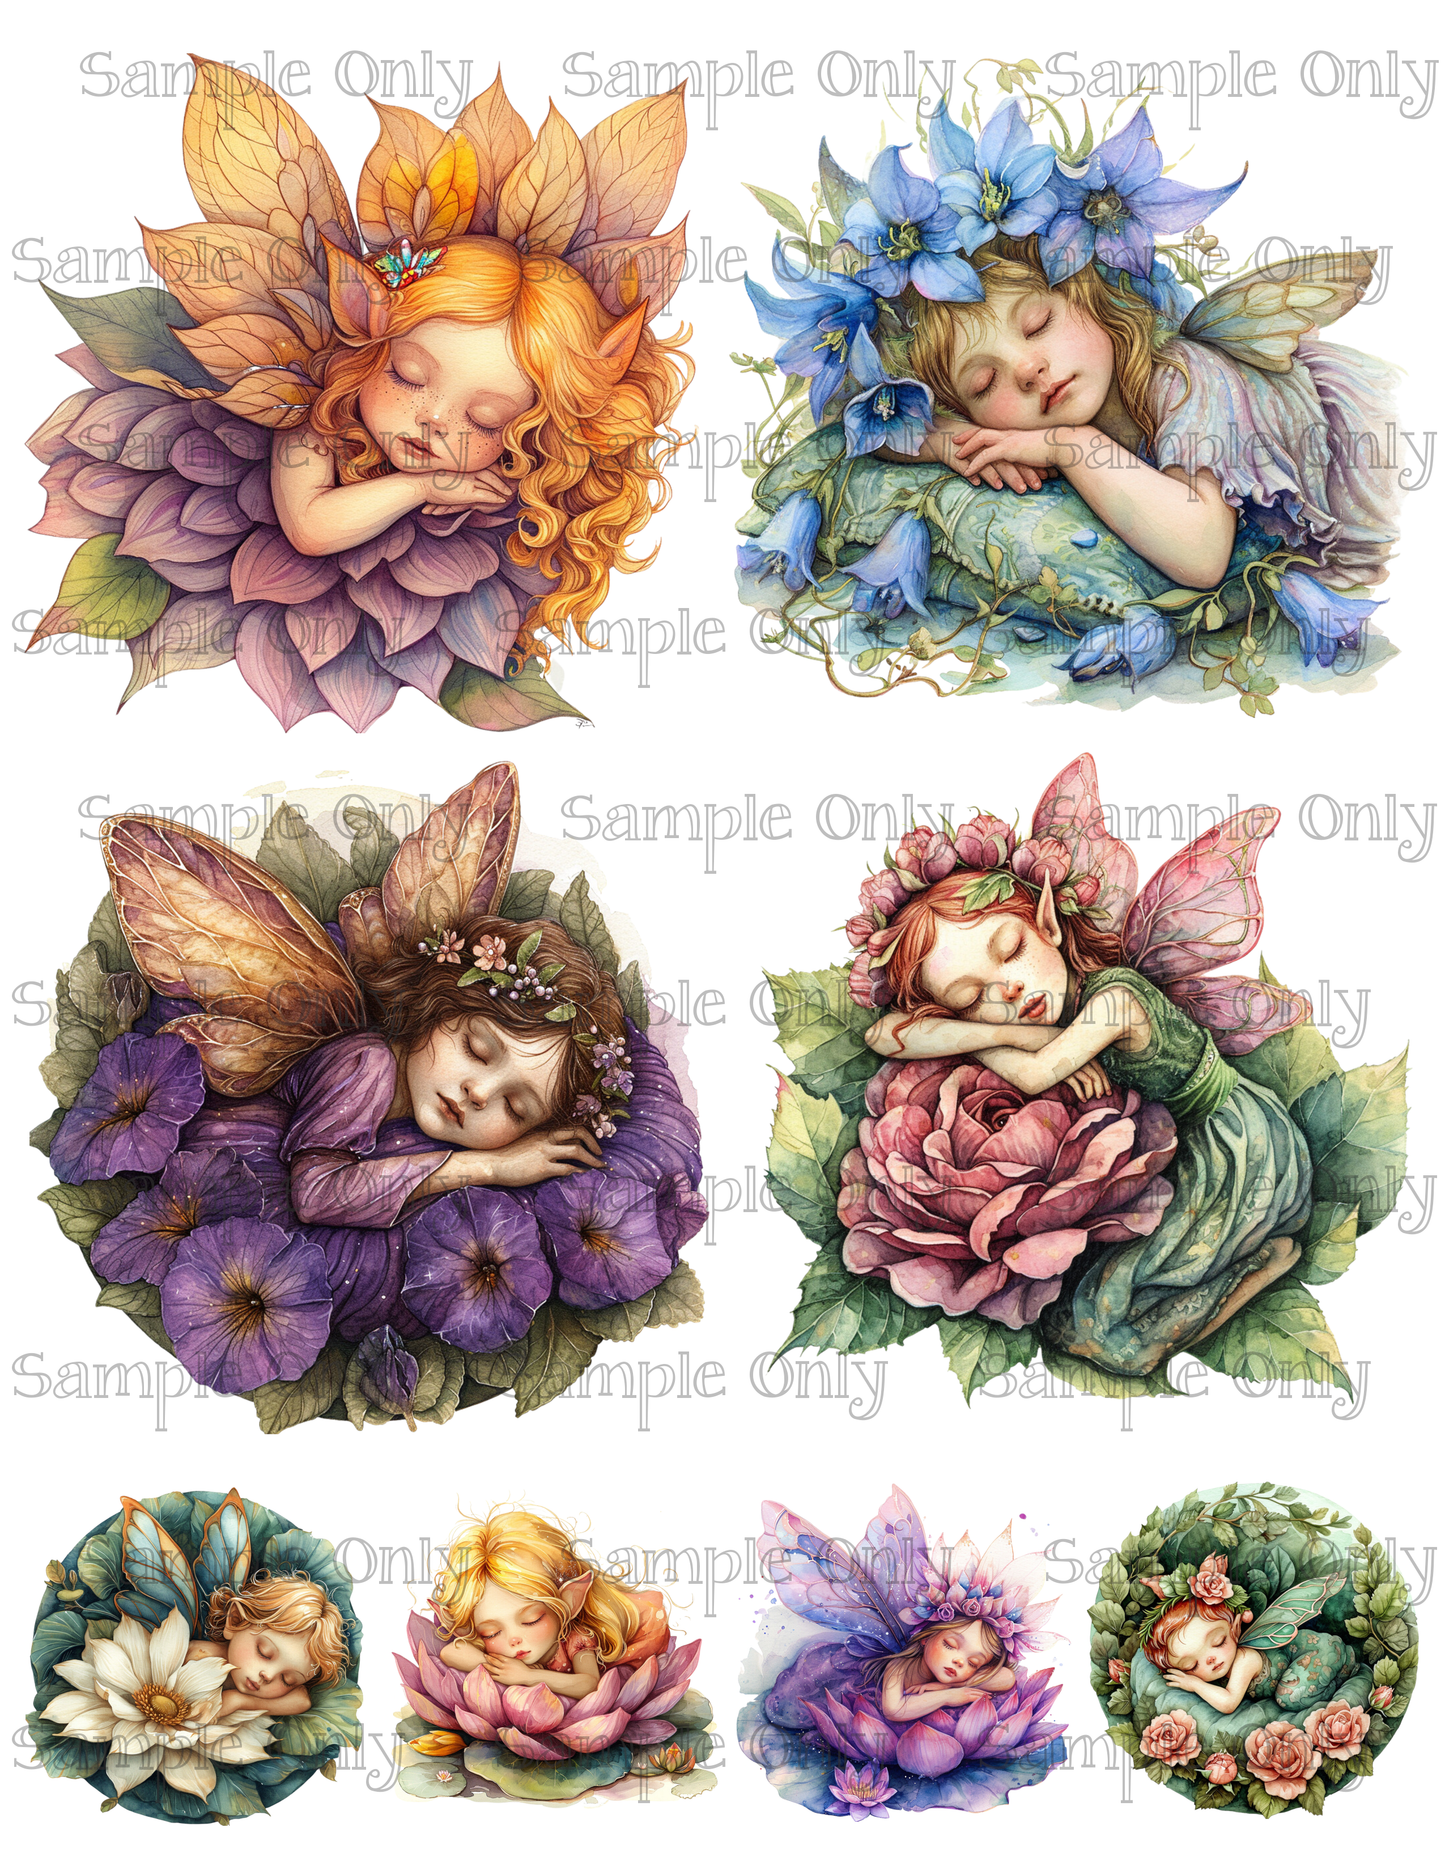 4 Inch Sleeping Fairy Image Sheet For Polymer Clay Transfer Decal DIGITAL FILE OR PRINTED